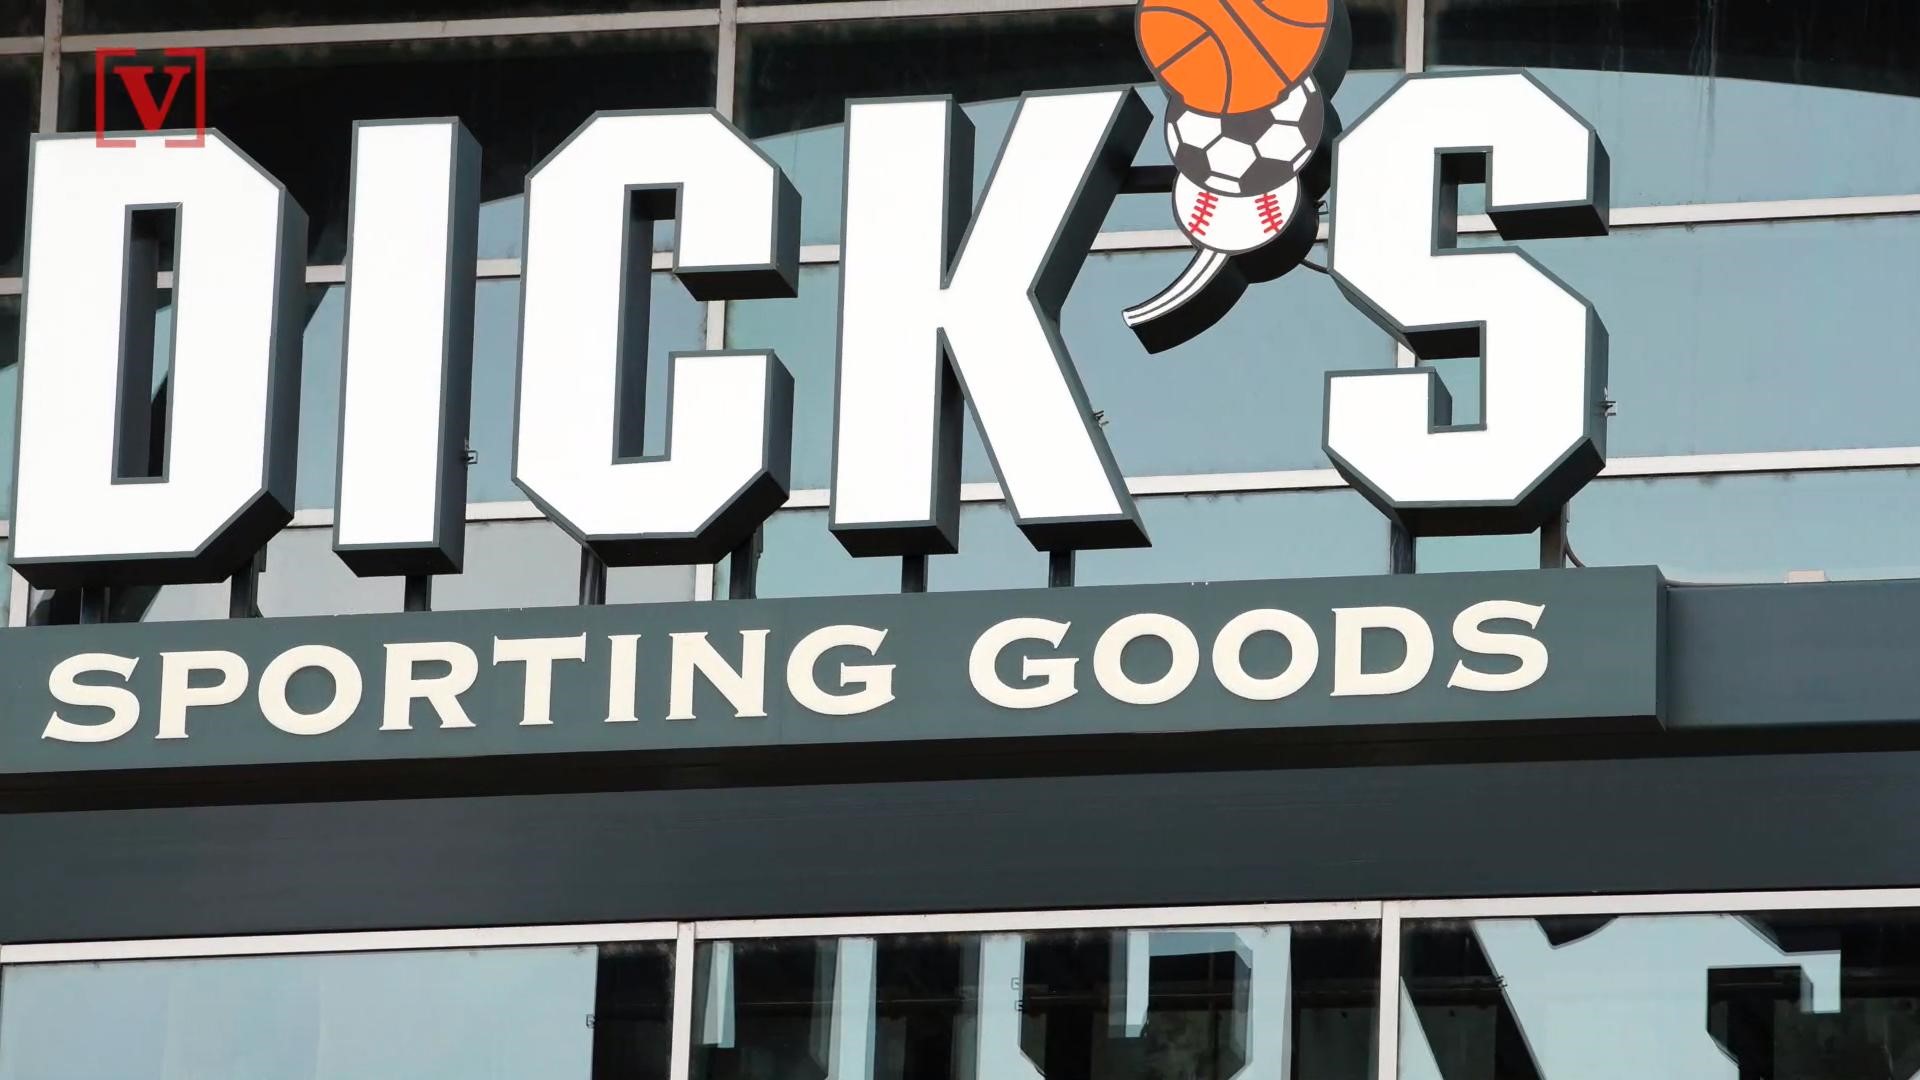 Dick's Sporting Goods will no longer sell assault-style rifles, like the ones used in the Parkland school shooting. Nathan Rousseau Smith has the story.